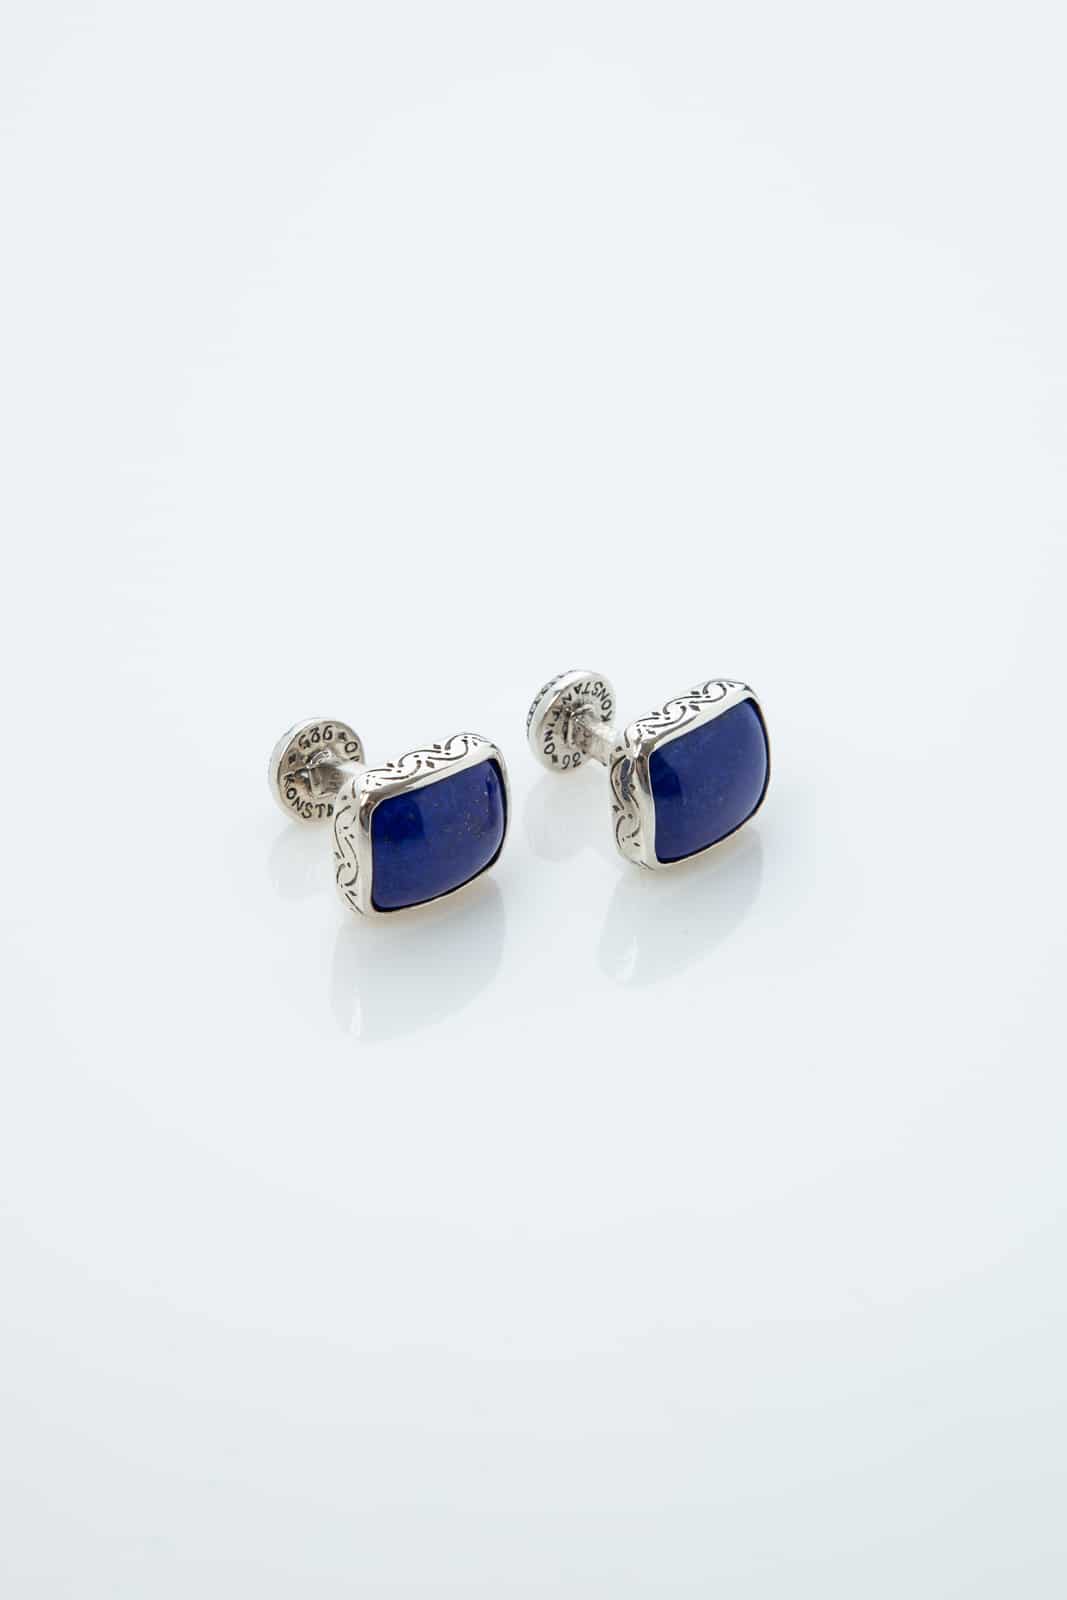 CUFFLINKS WITH LAPIS STONES IN STERLING SILVER